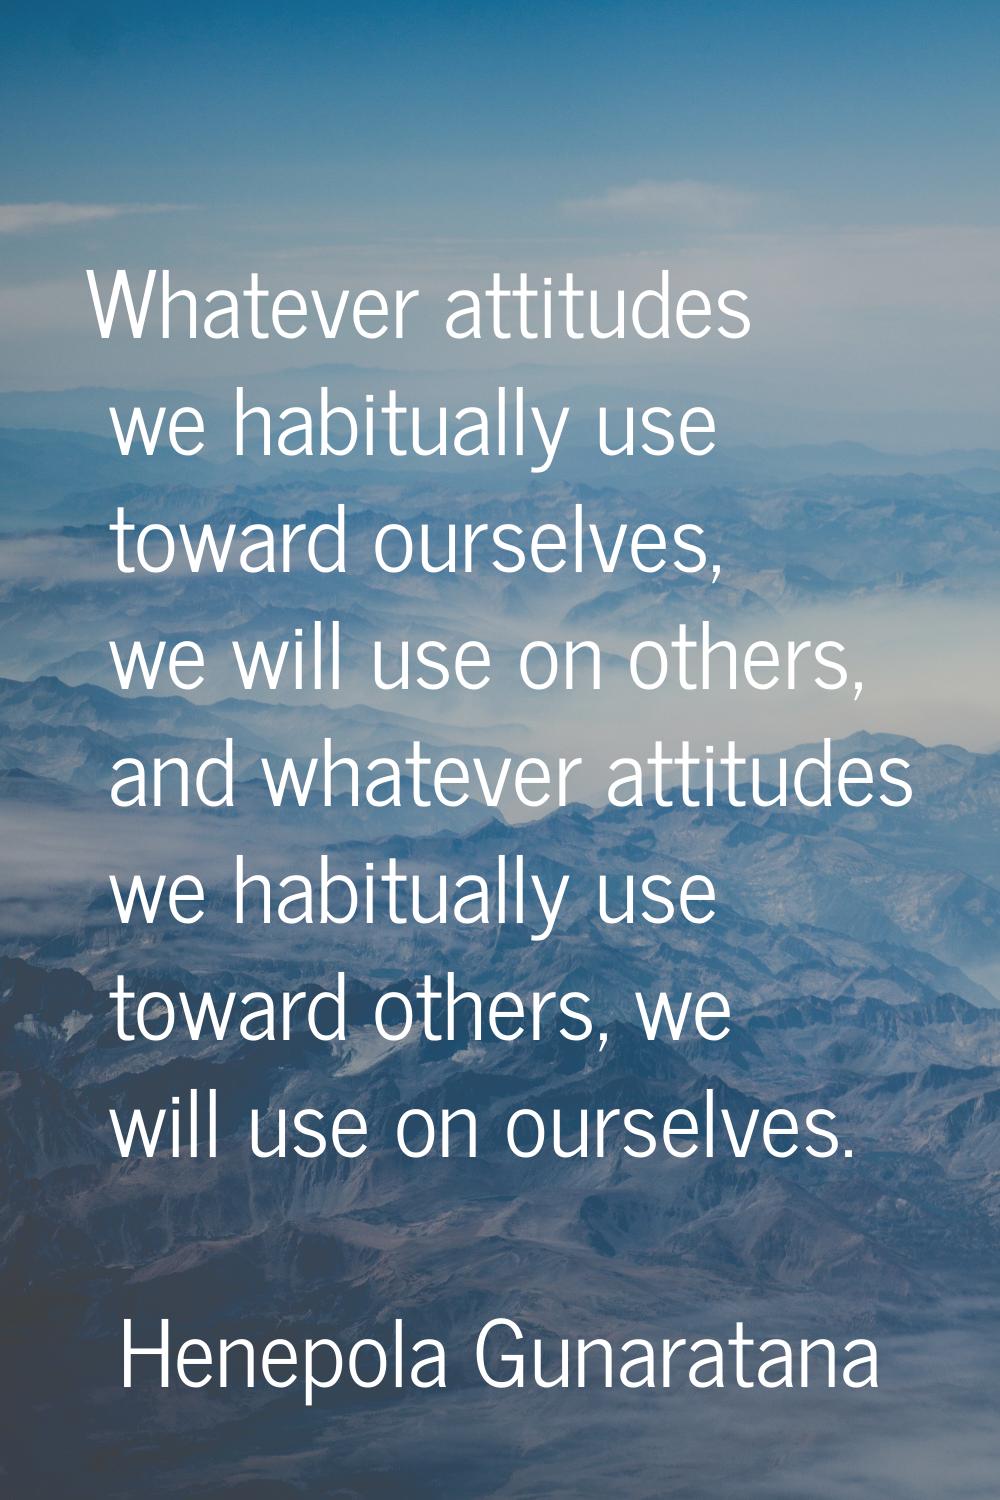 Whatever attitudes we habitually use toward ourselves, we will use on others, and whatever attitude